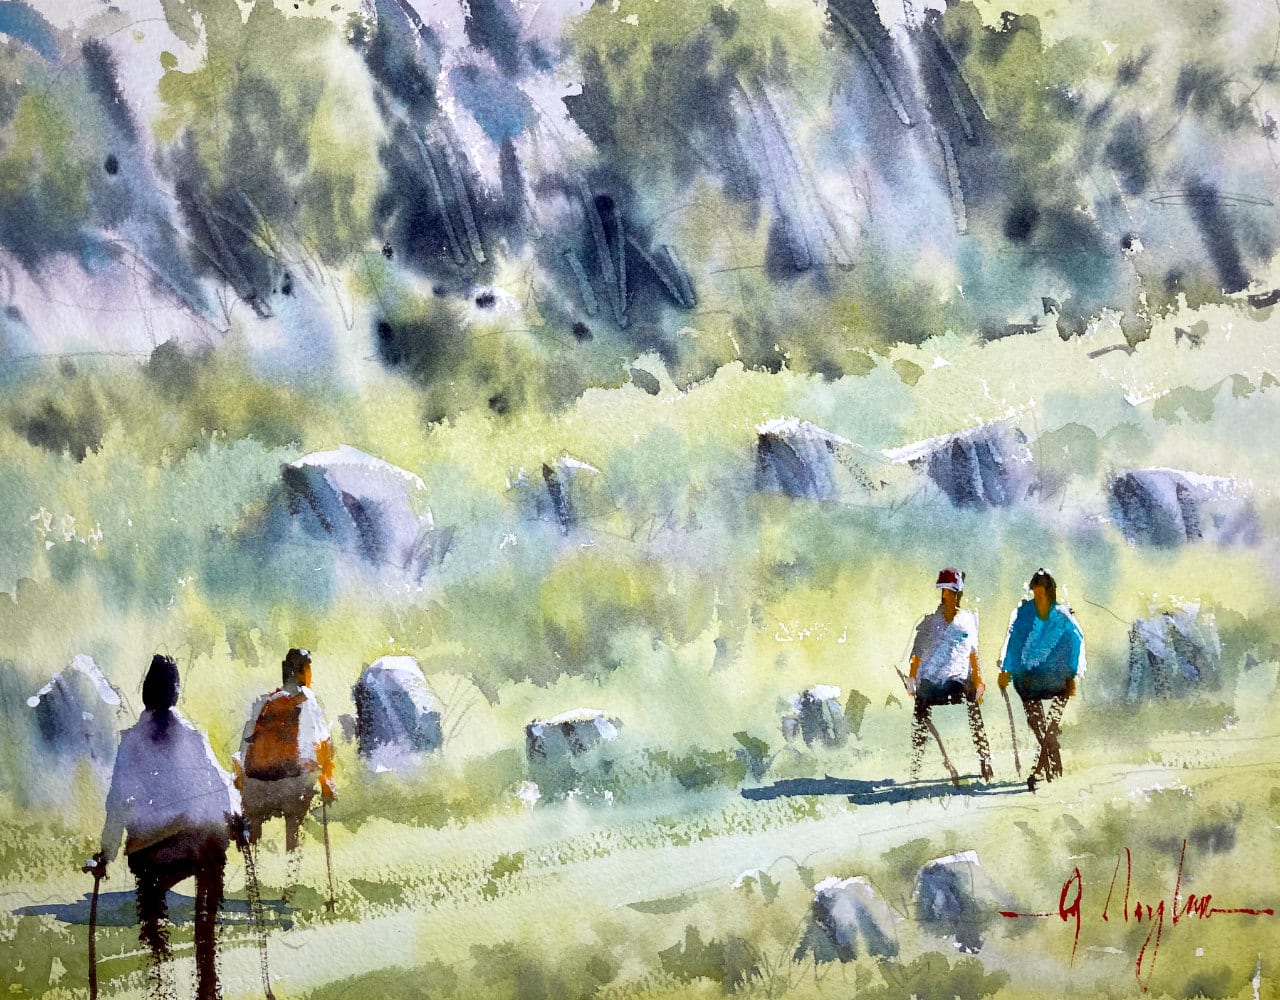 Painting of a strange but beautiful Japanese national park called Hiraodai